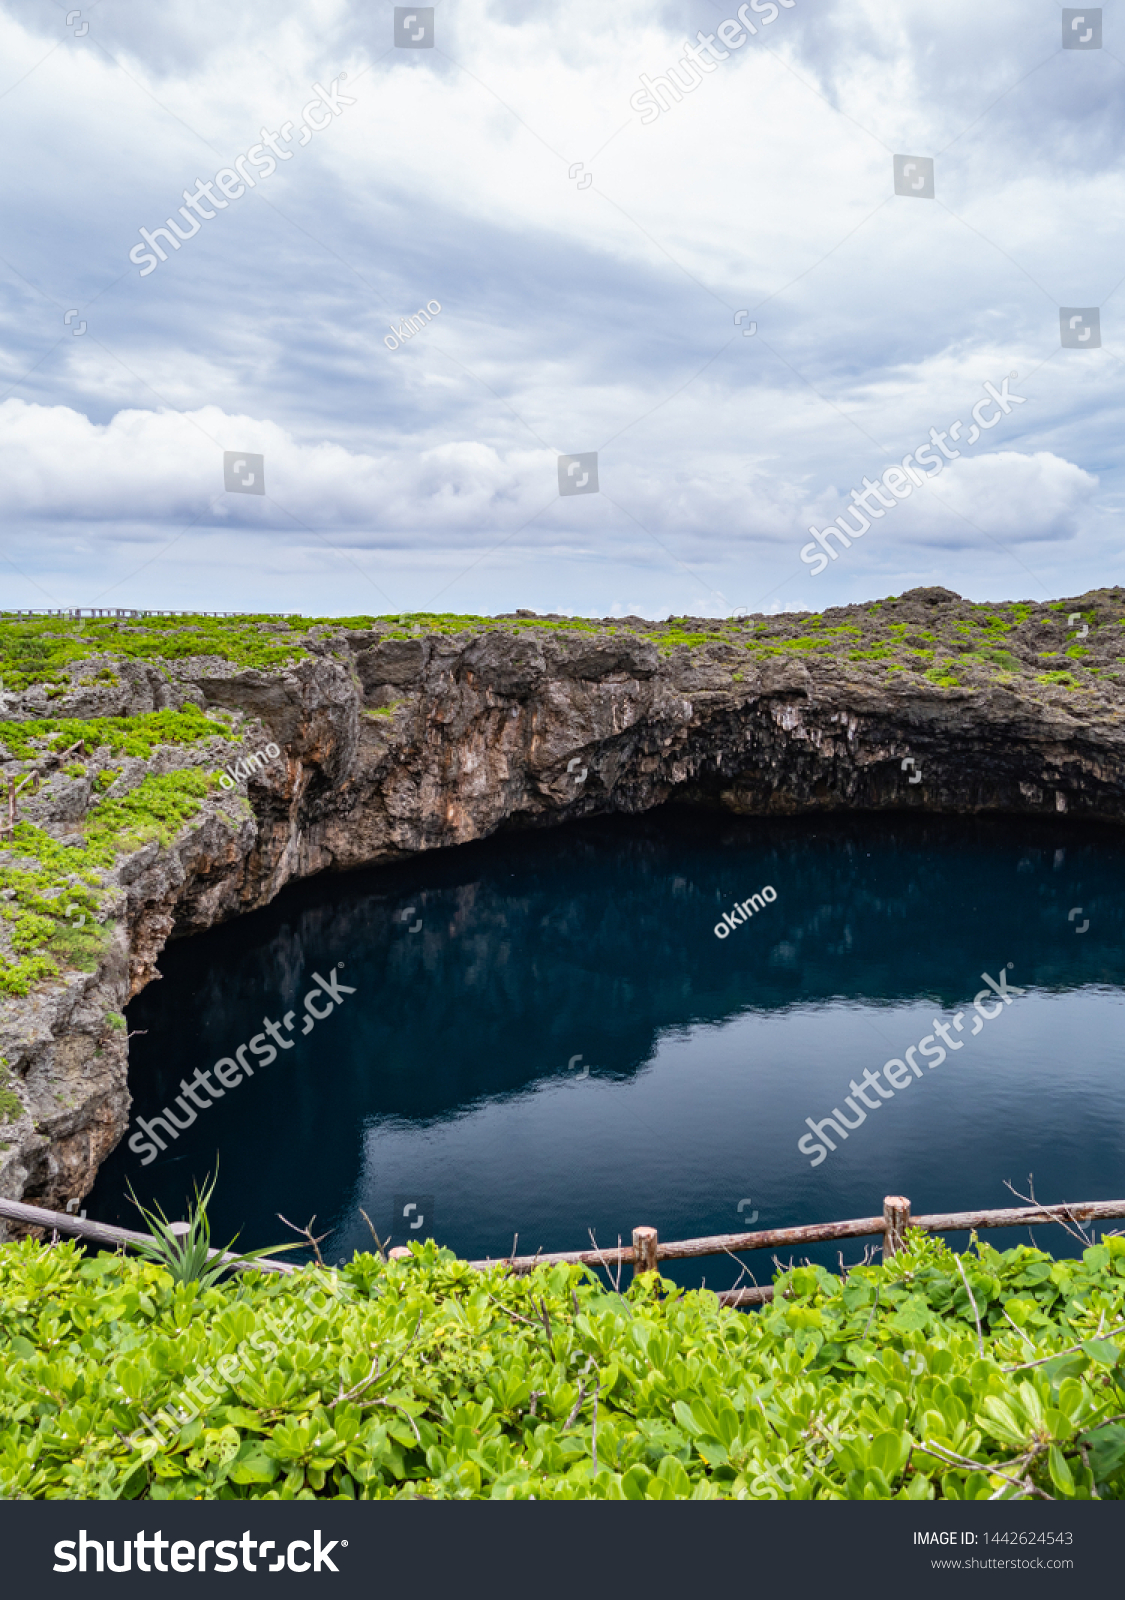 Toriike Pond is a pond located in the western part of Shimojijima Island, Miyakojima, Okinawa, Japan. It looks like two ponds lined up next to each other but they are actually connected underground. #1442624543